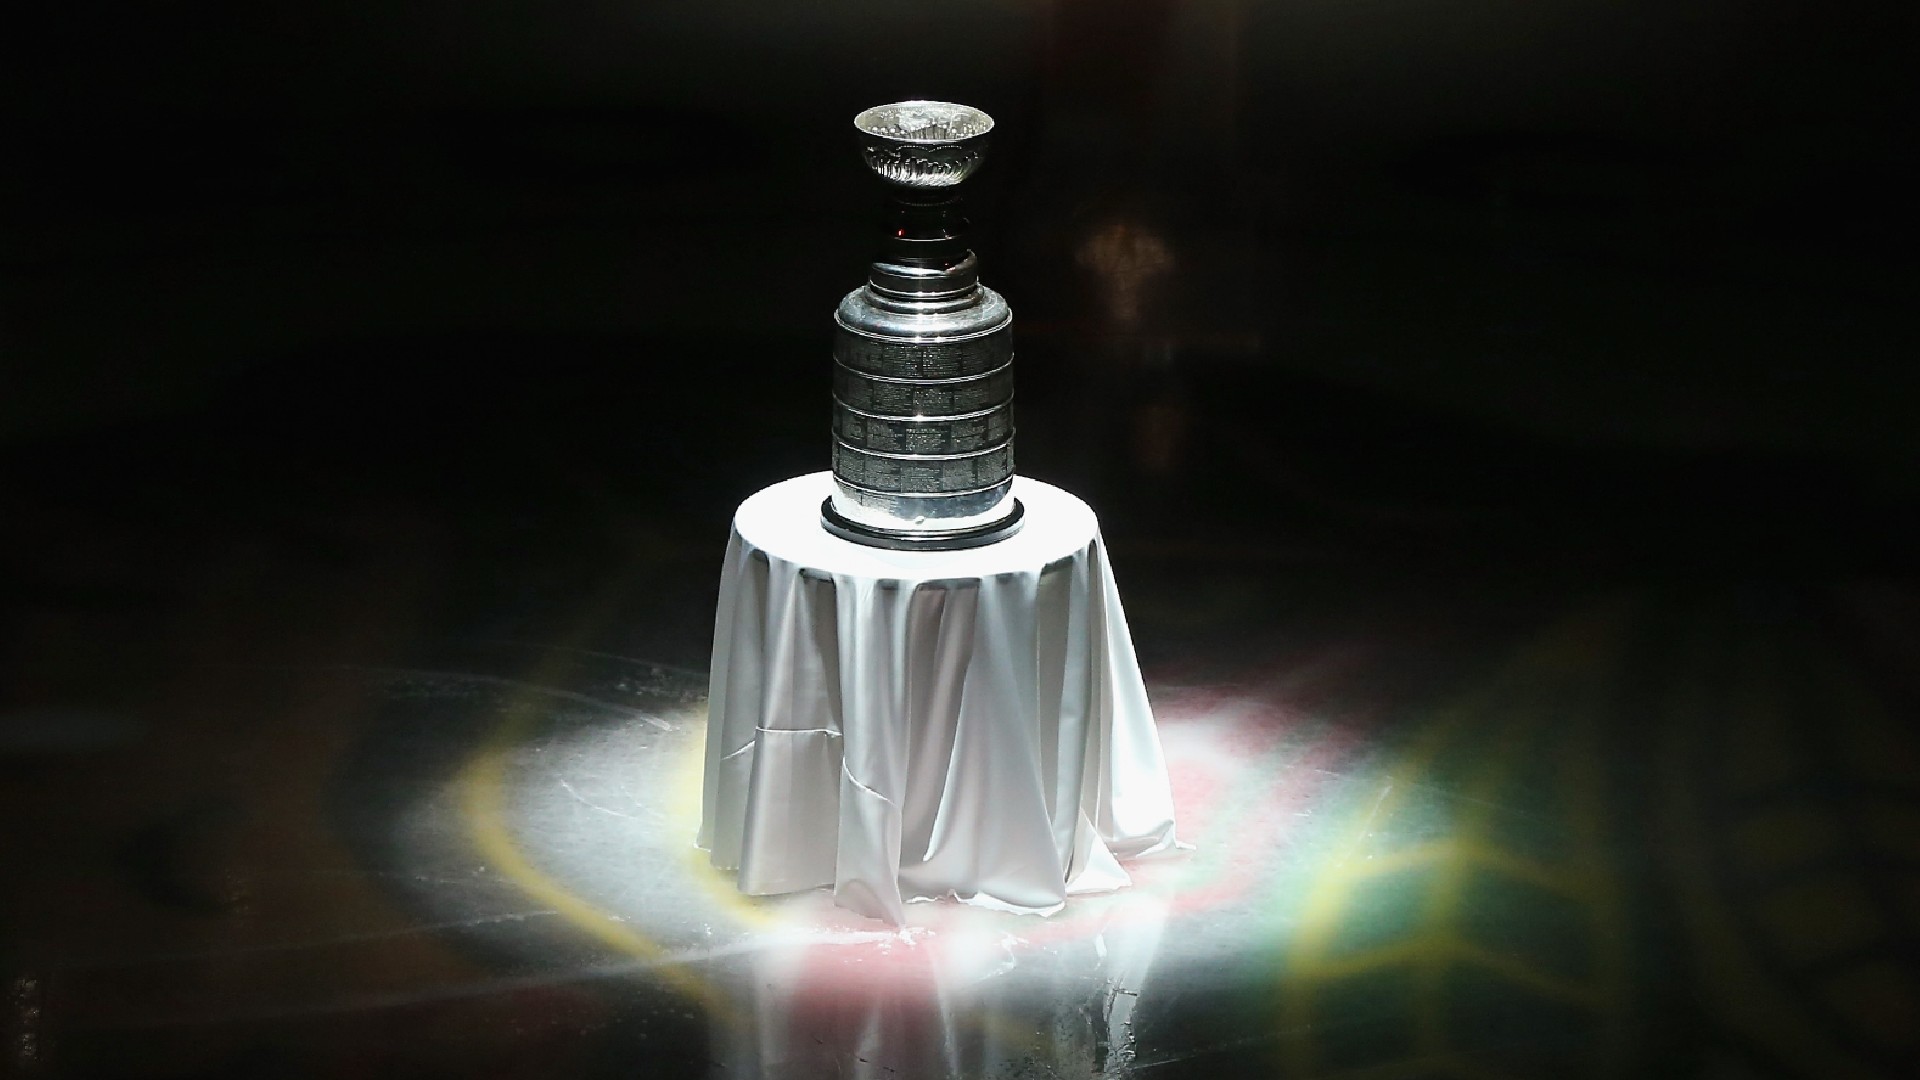 NHL playoff games today: Full TV schedule to watch 2021 Stanley Cup playoff games thumbnail